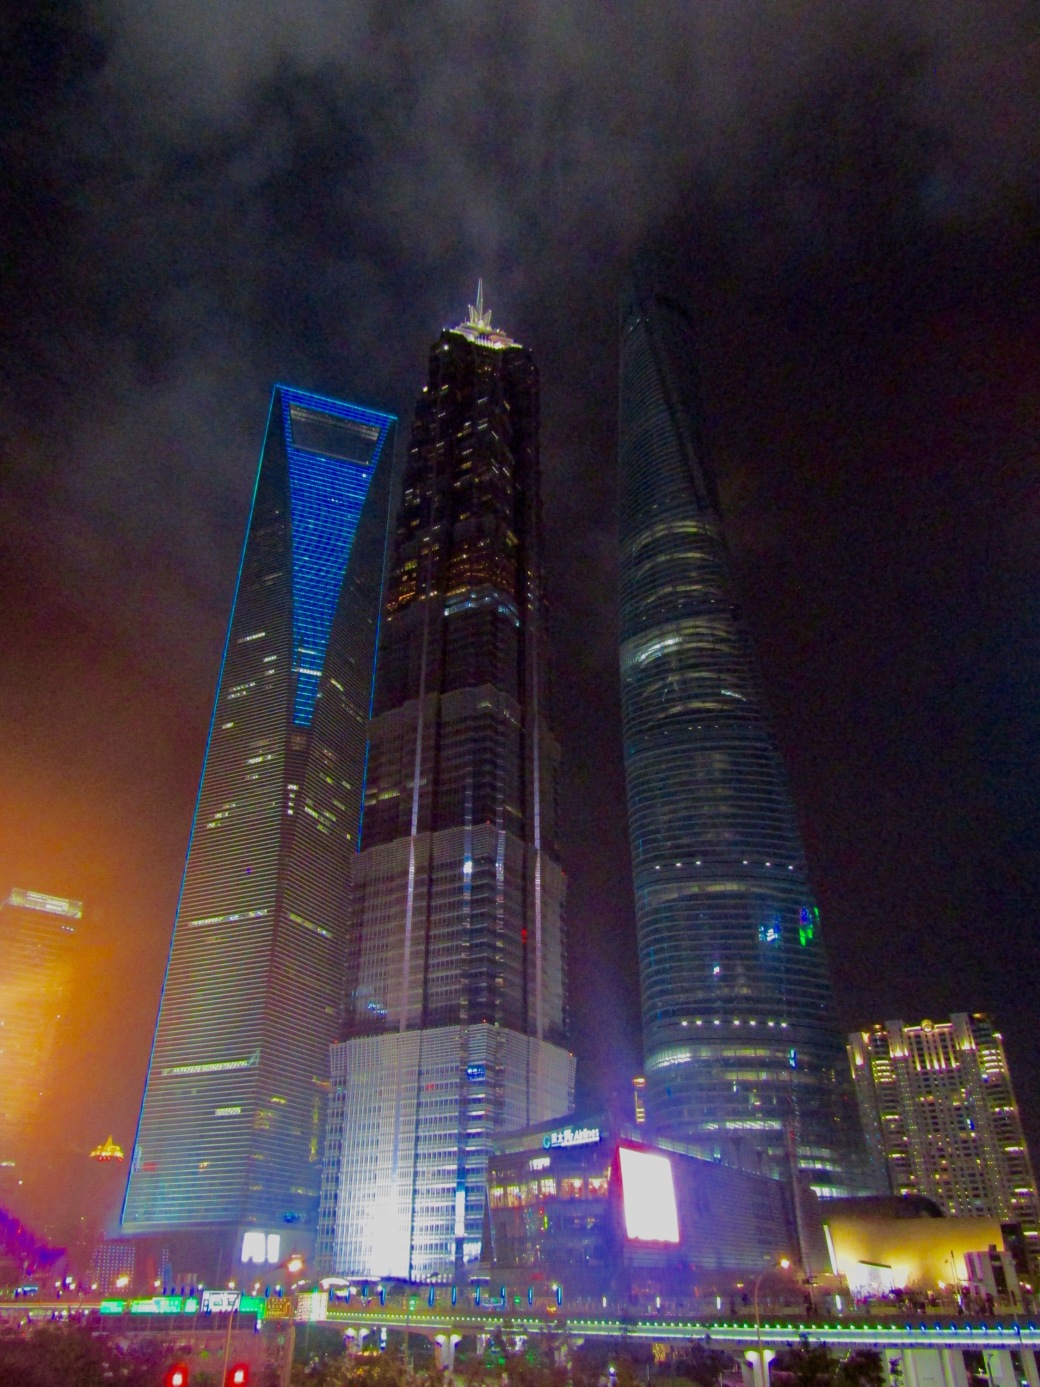 Three behemoths of the Shanghai Skyline. At left, the World Financial Center houses the world's second-highest hotel. In the center, Jin Mao Tower was once China's tallest building. At right, China's current champion is Shanghai Tower, the world's second-tallest building.